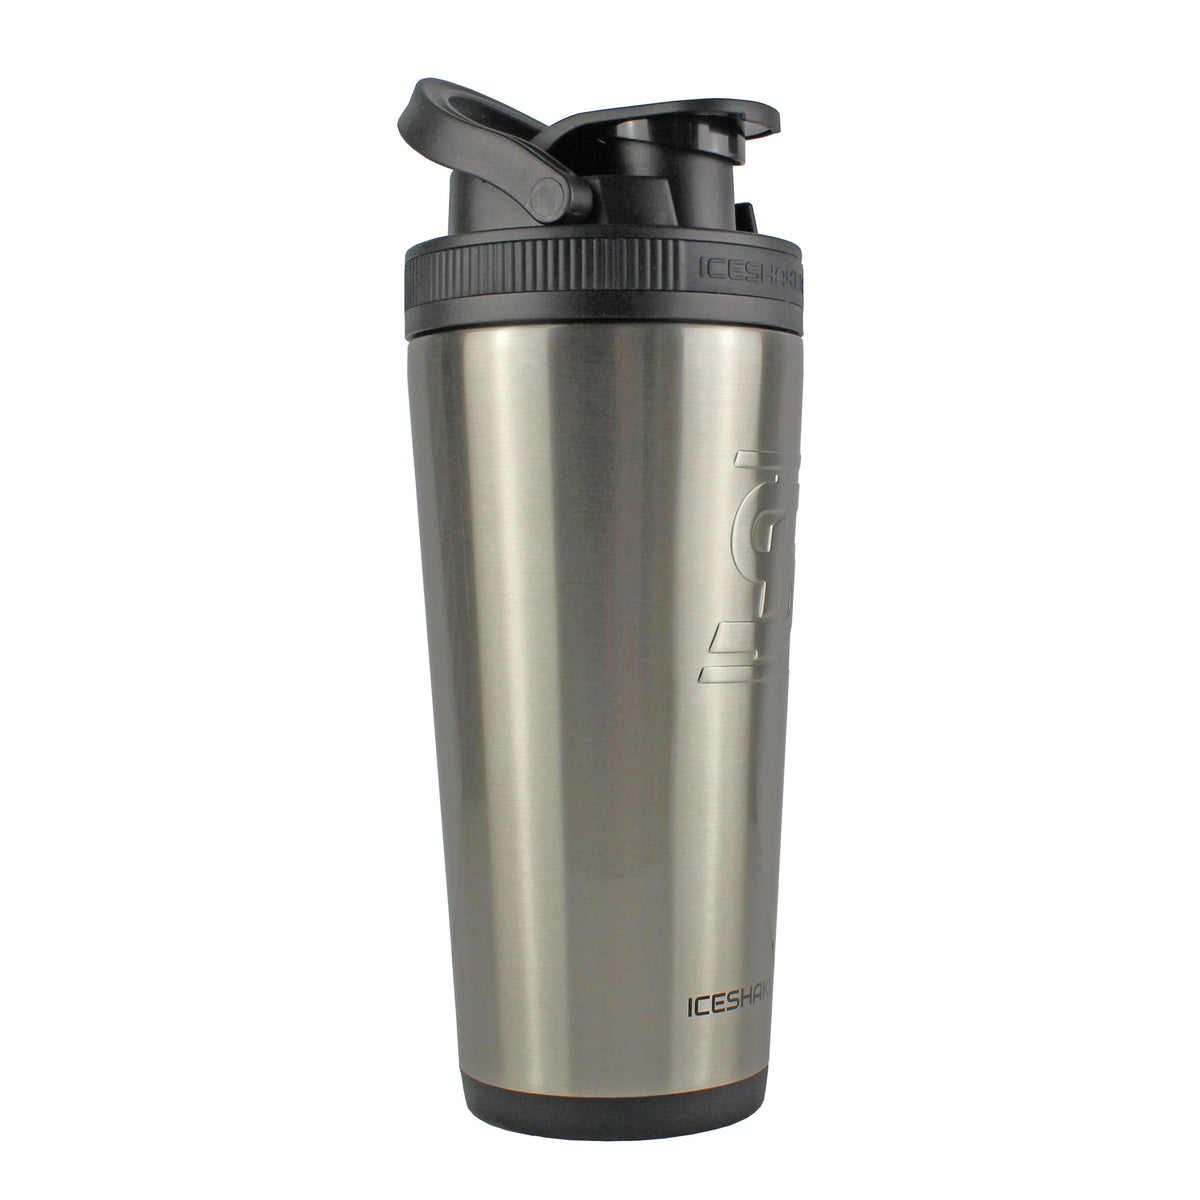 750ml Cocktail Shaker,Shaker Cup Stainless Steel Water Bottle,Shaker  Bottles For Protein Mixes,BPAFr…See more 750ml Cocktail Shaker,Shaker Cup